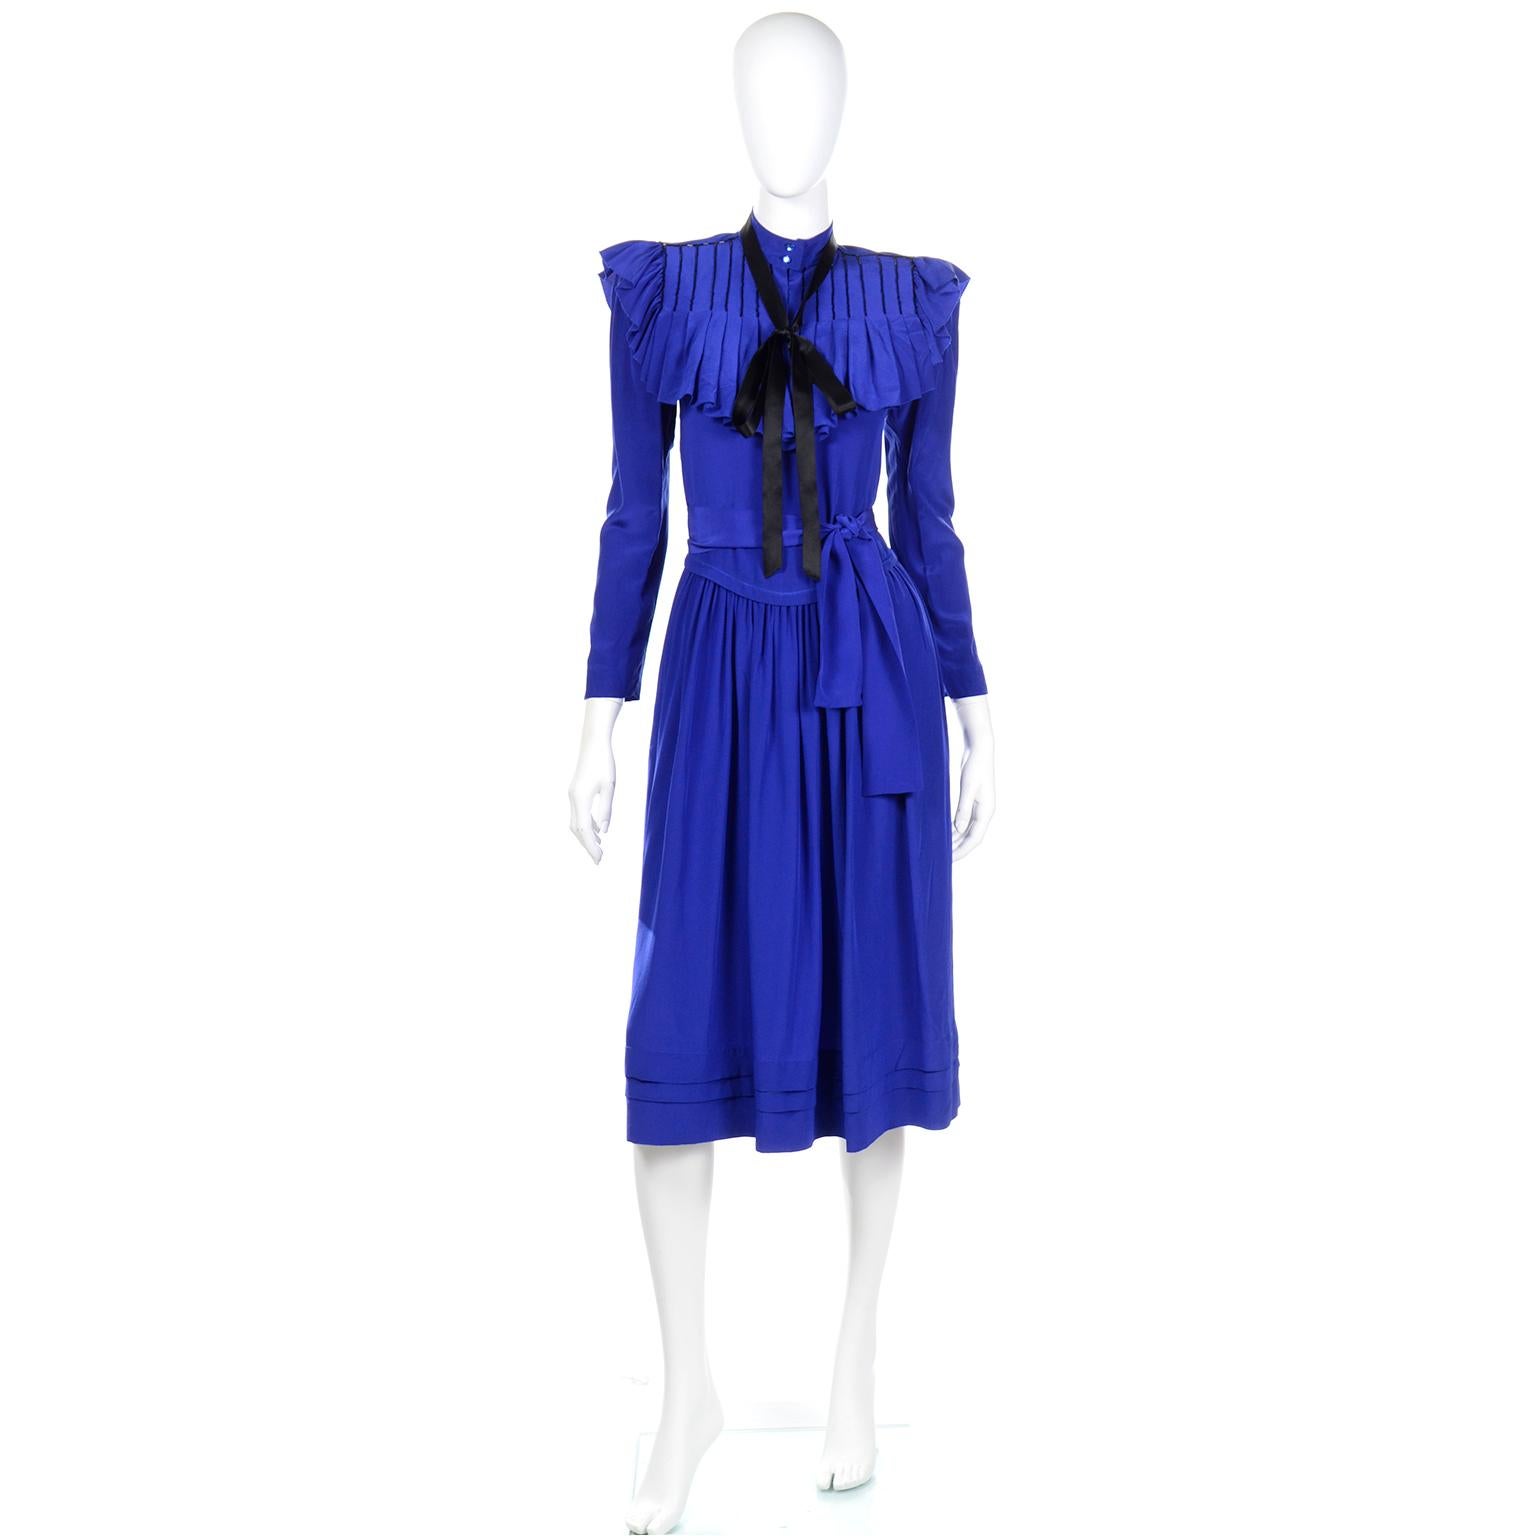 We love vintage Norma Walters pieces. Many of our finest estates have her pieces in their collections. This dress is in a blue silk with detachable beaded collar with a black silk tie.  The dress has shoulder pads,side slit pockets, and closes with